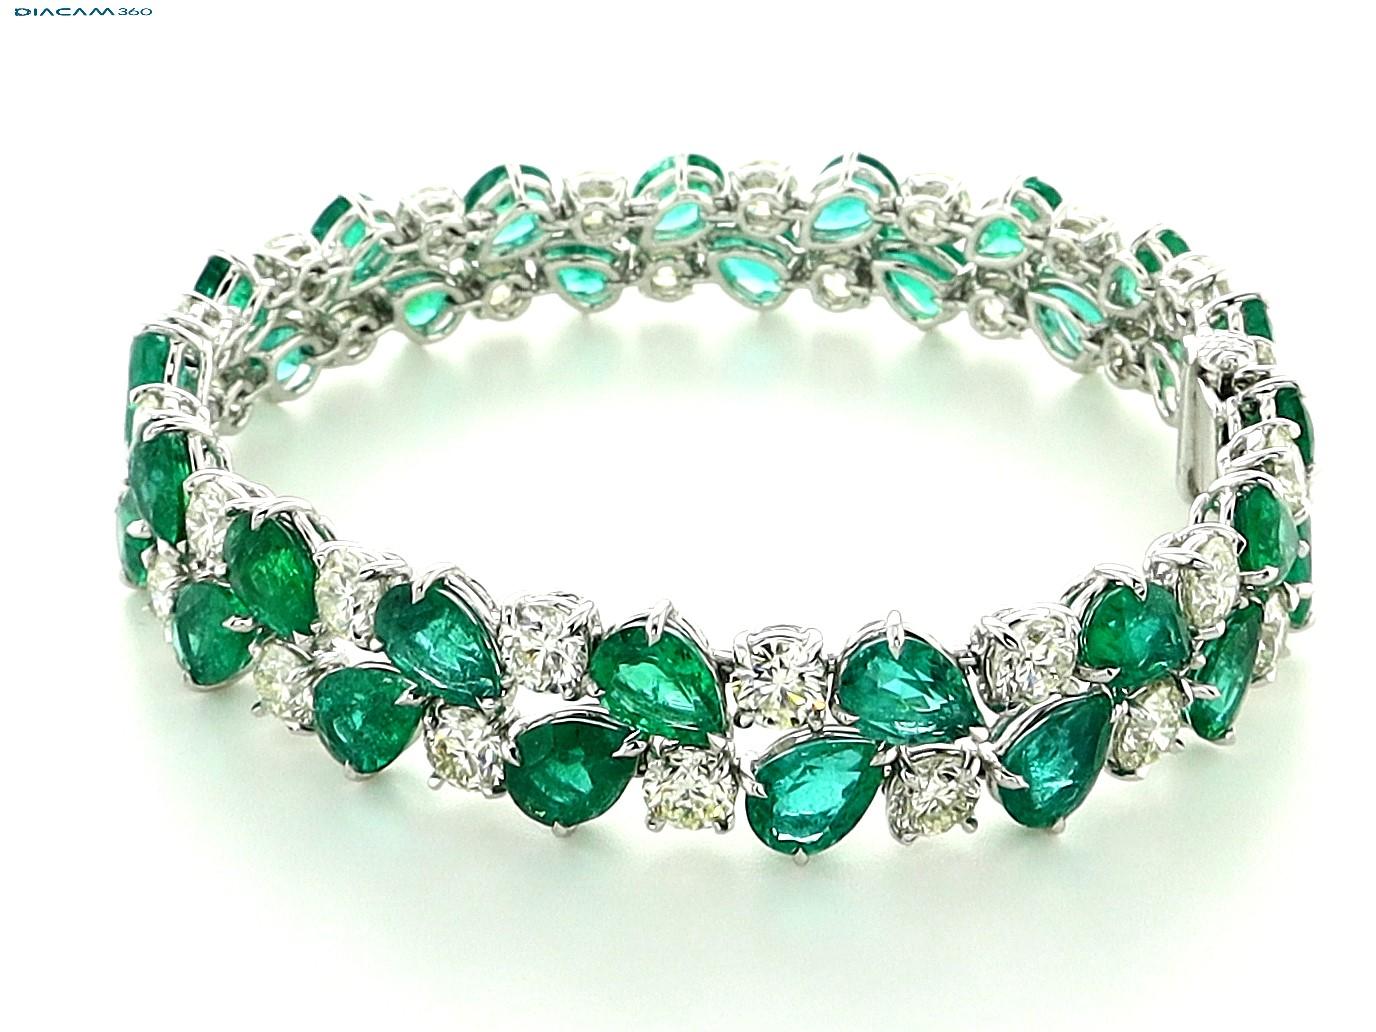 Sophia D platinum bracelet with 35 round diamonds that totals 12.83 carats and 34 pear cut emeralds that totals 22.26 carats.

The length is 18 cm and is about 1 cm wide. 

Sophia D by Joseph Dardashti LTD has been known worldwide for 35 years and